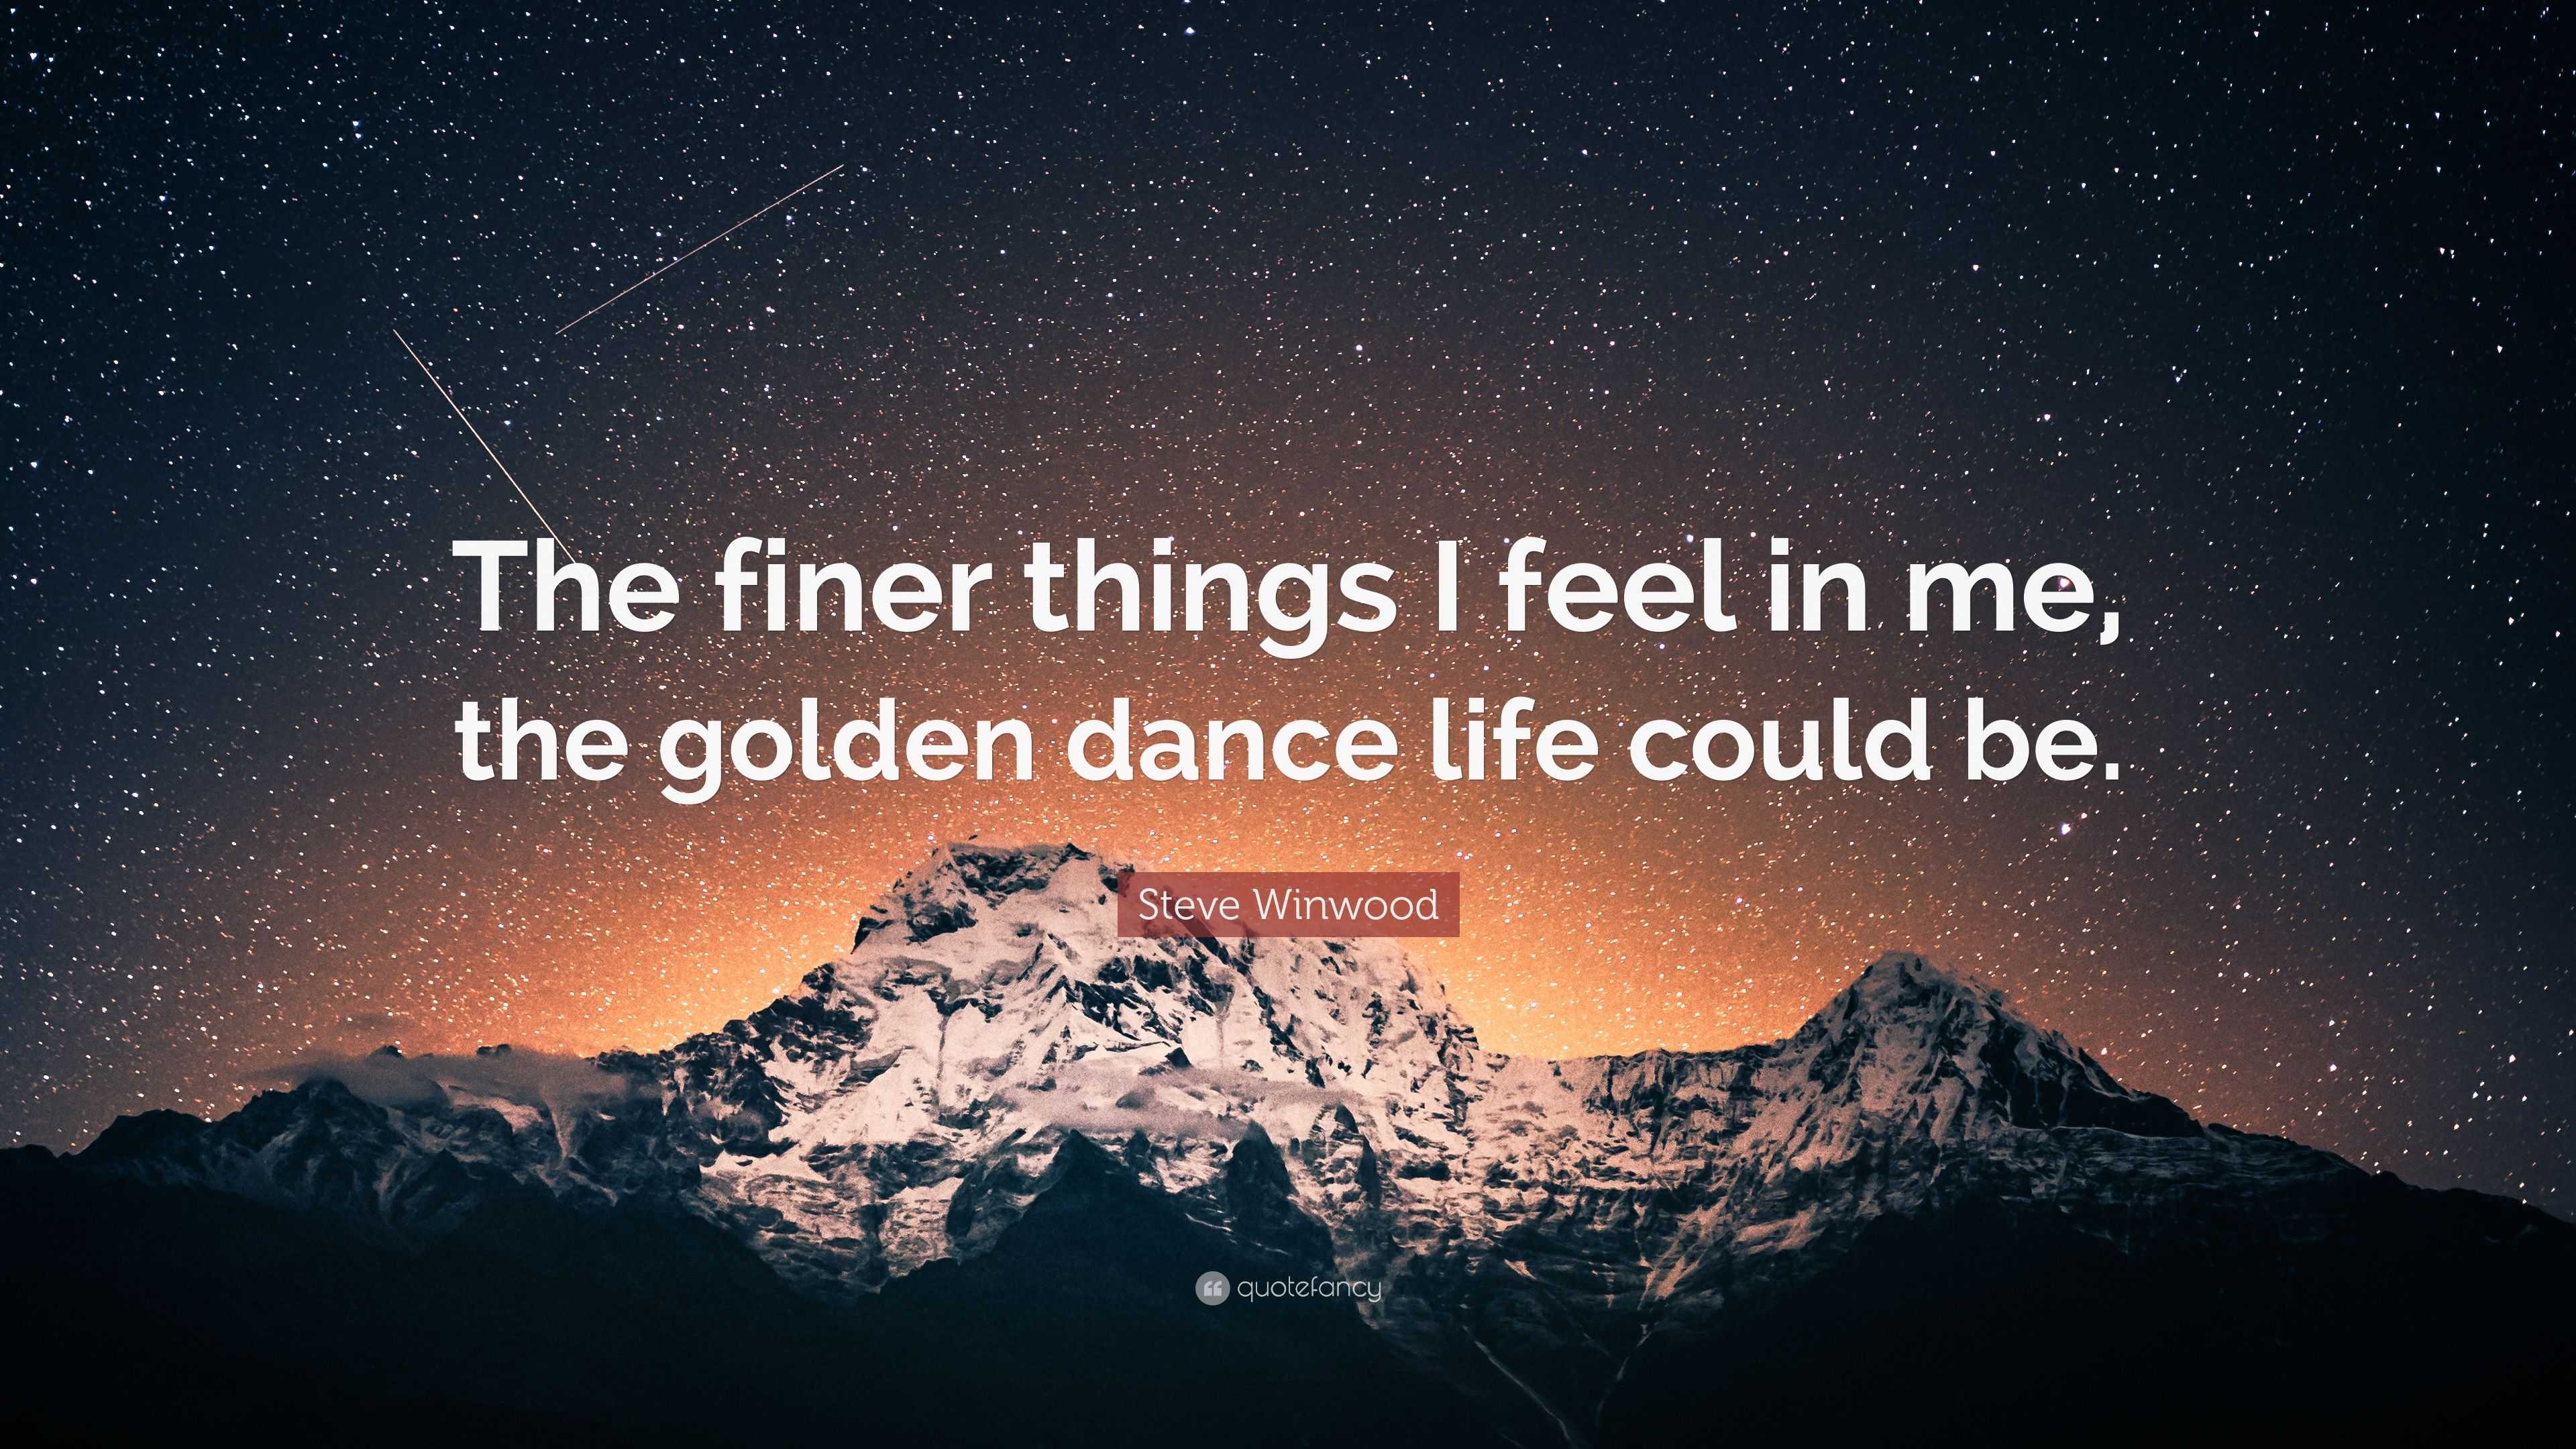 Steve Winwood Quote “The finer things I feel in me the golden dance